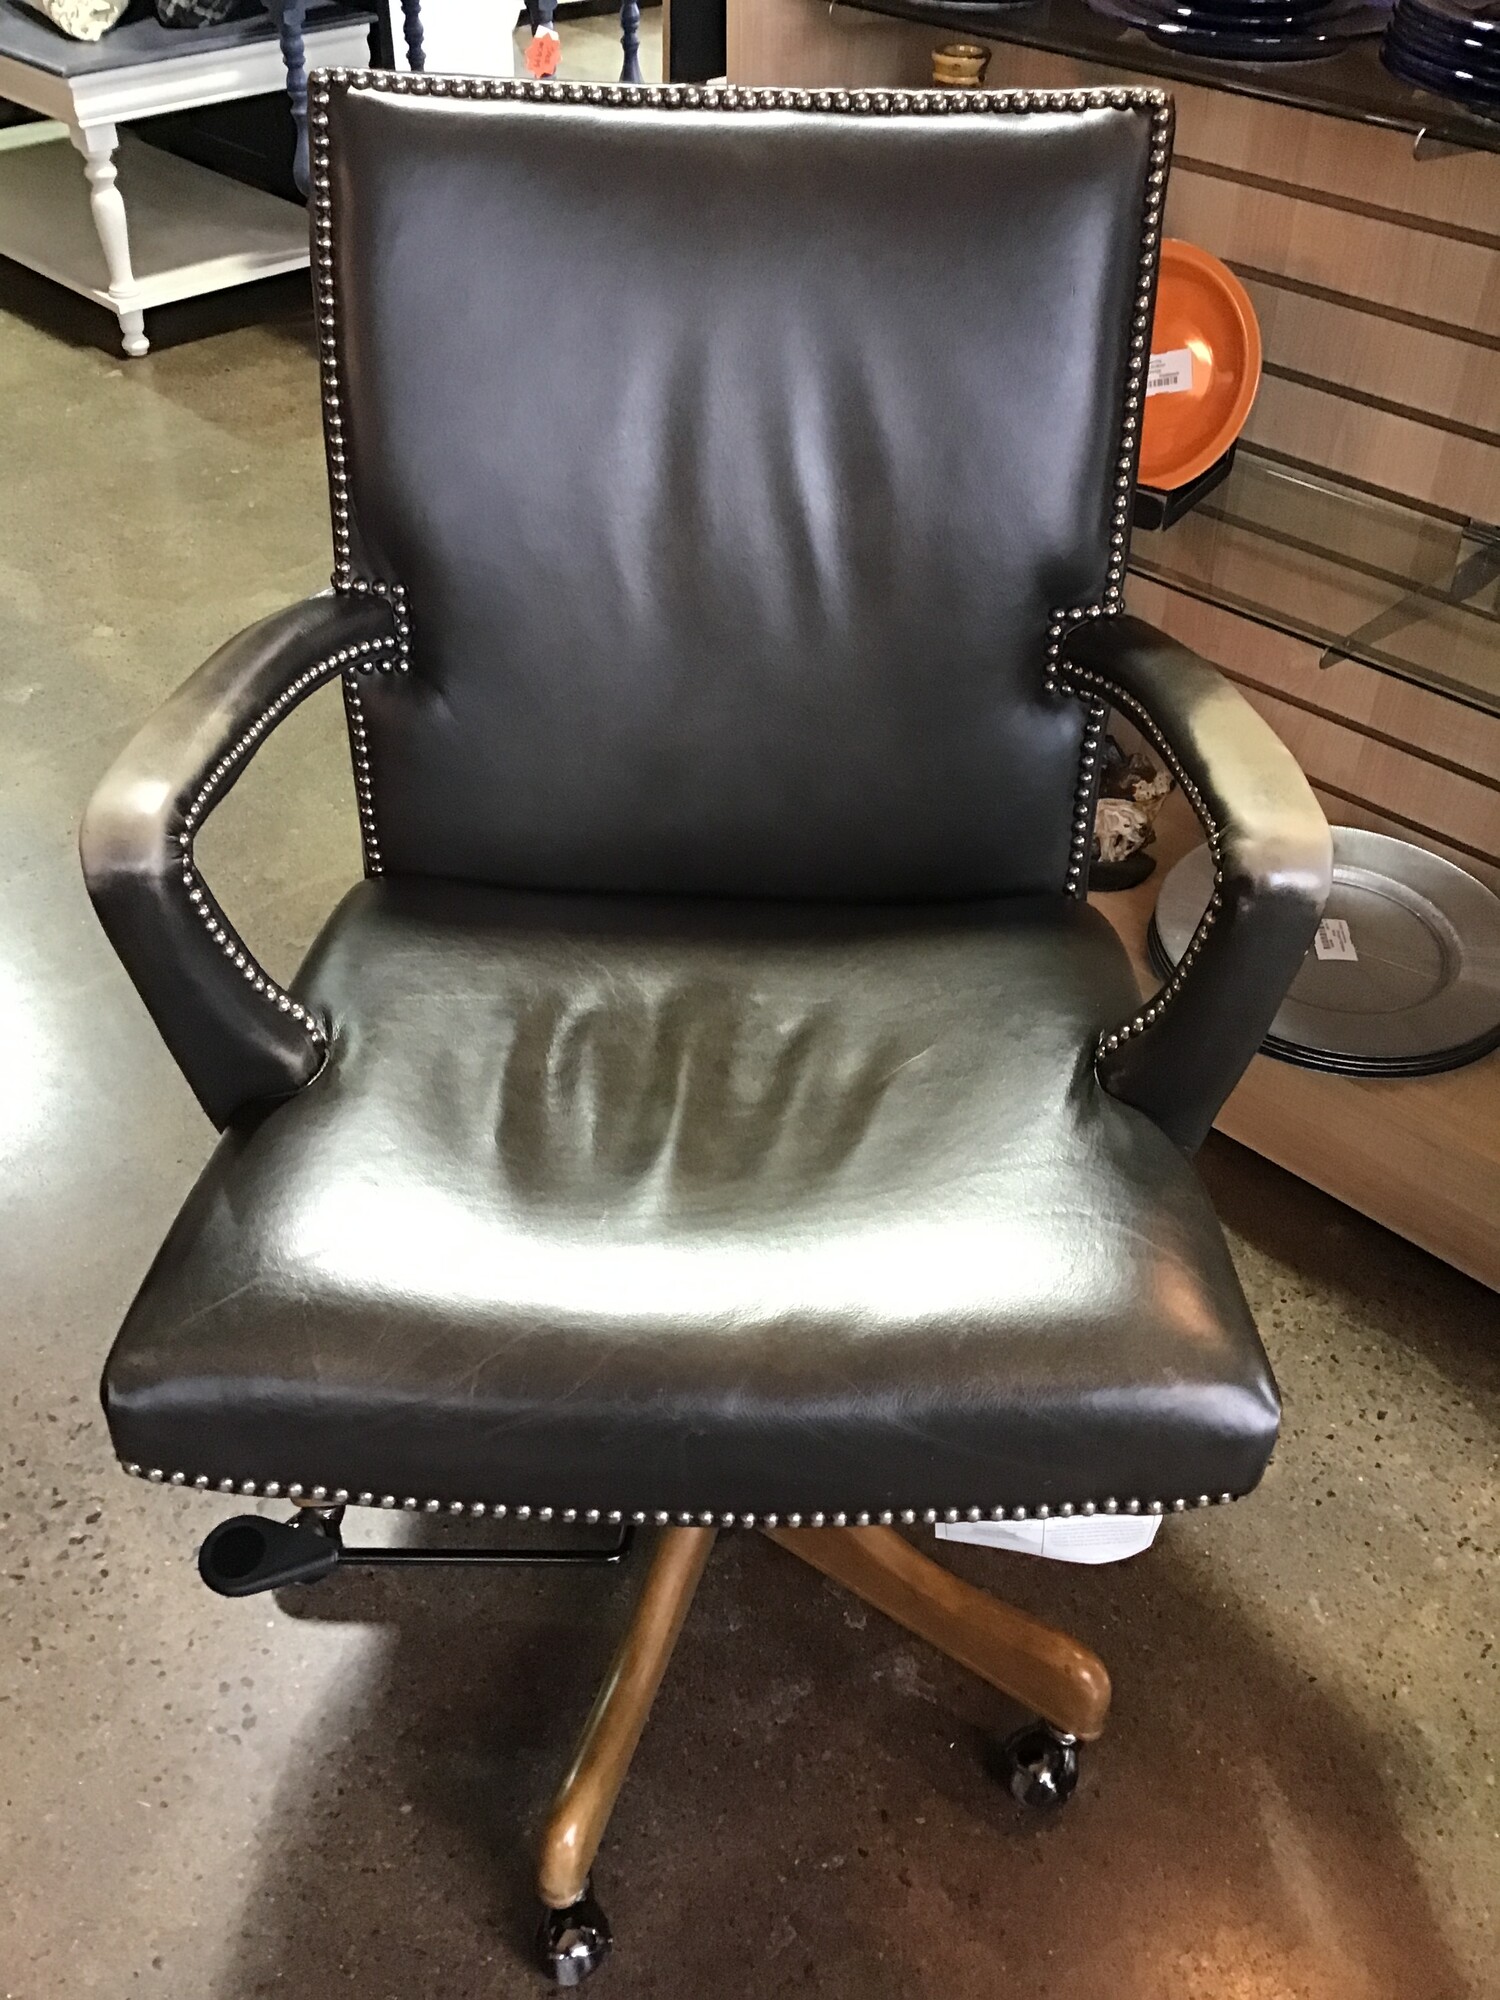 This super comfortable leather desk chair from Arhaus would make the perfect chair for your home office! It is upholstered in a medium-tone gray leather with nailhead accents. The arms are weathered and there are some scratches on the back. TONS of life still left in this piece!